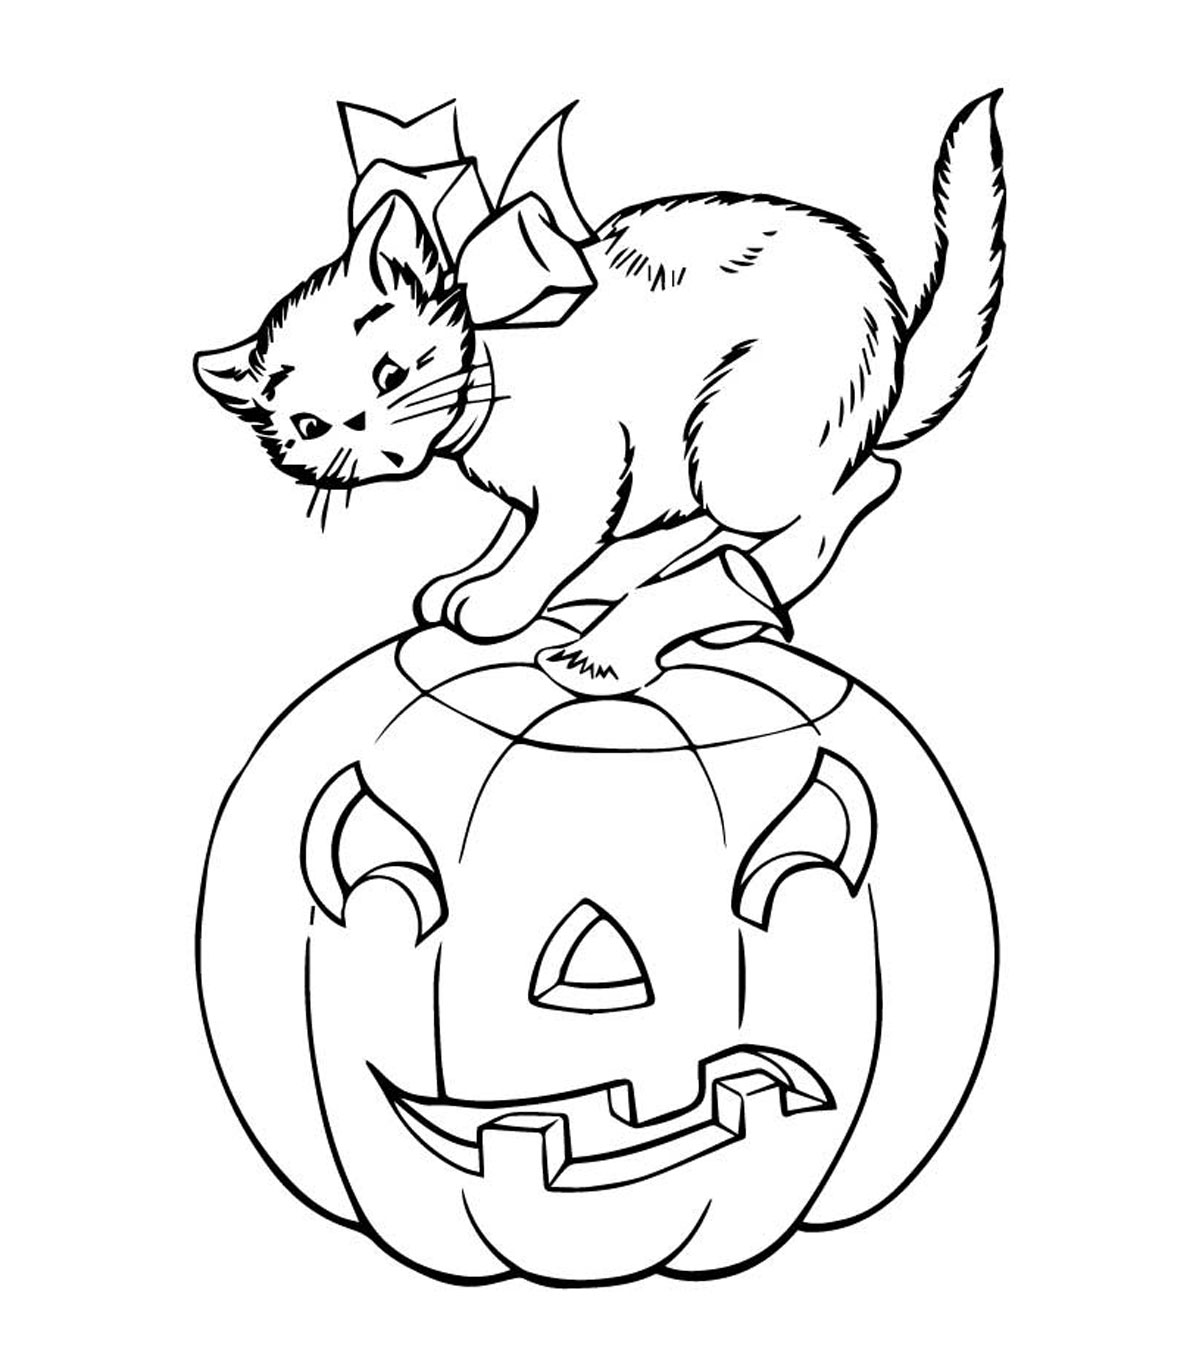 Top 25 Pumpkin Patch Coloring Pages Your Toddler Will Love To Do_image